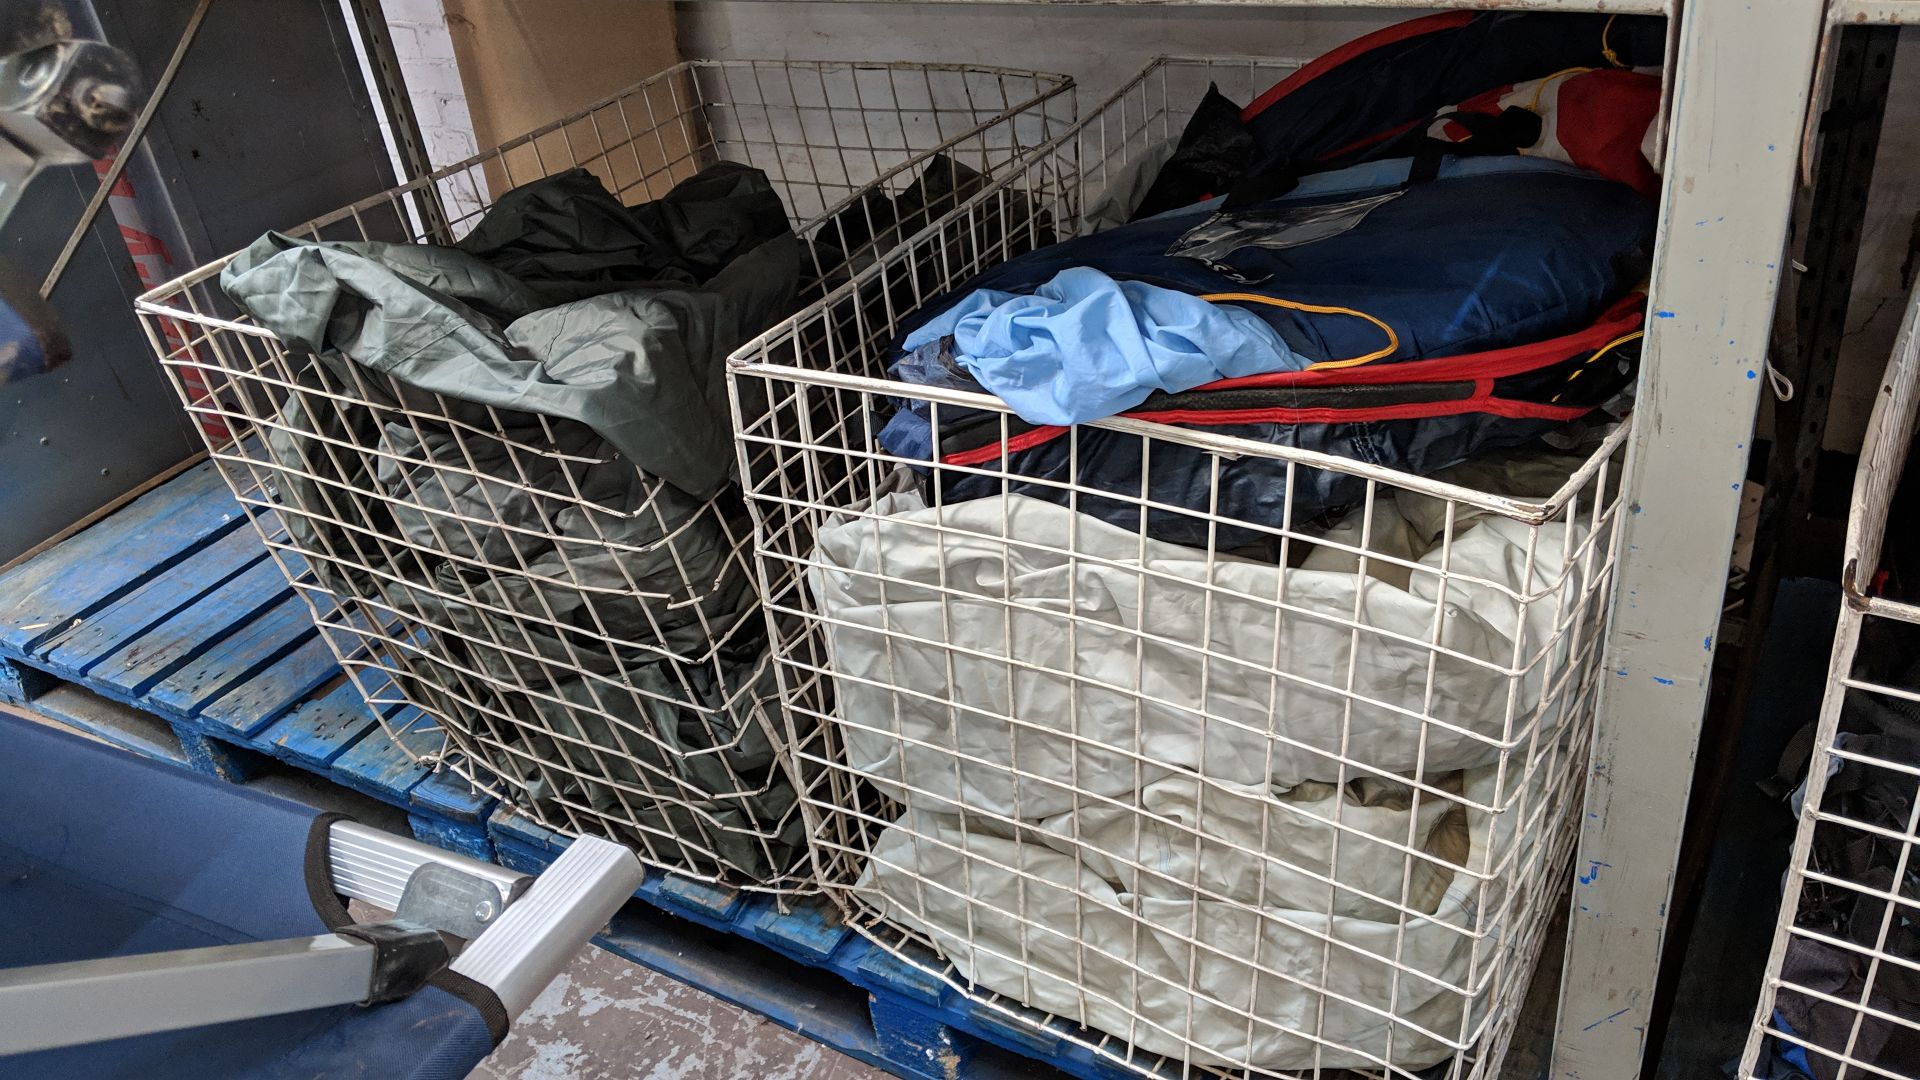 Contents of 2 large cages which appear to consist of 4 large tents plus other related items - unsure